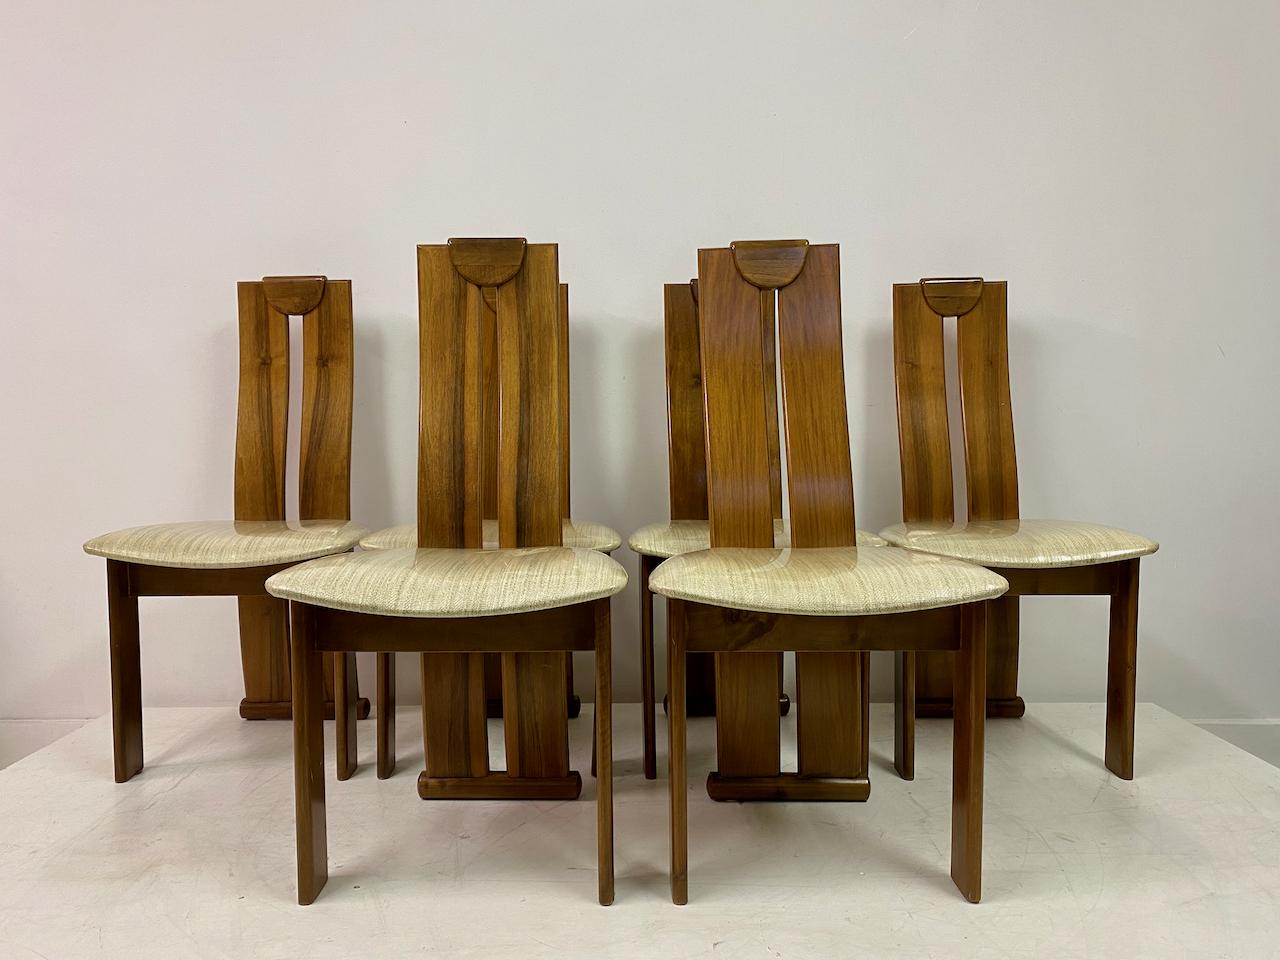 Set of six dining chairs

In the style of Afra and Tobia Scarpa

Walnut frame

Original upholstery (protected by later added plastic)

Seat height 47cm

Italy 1970s